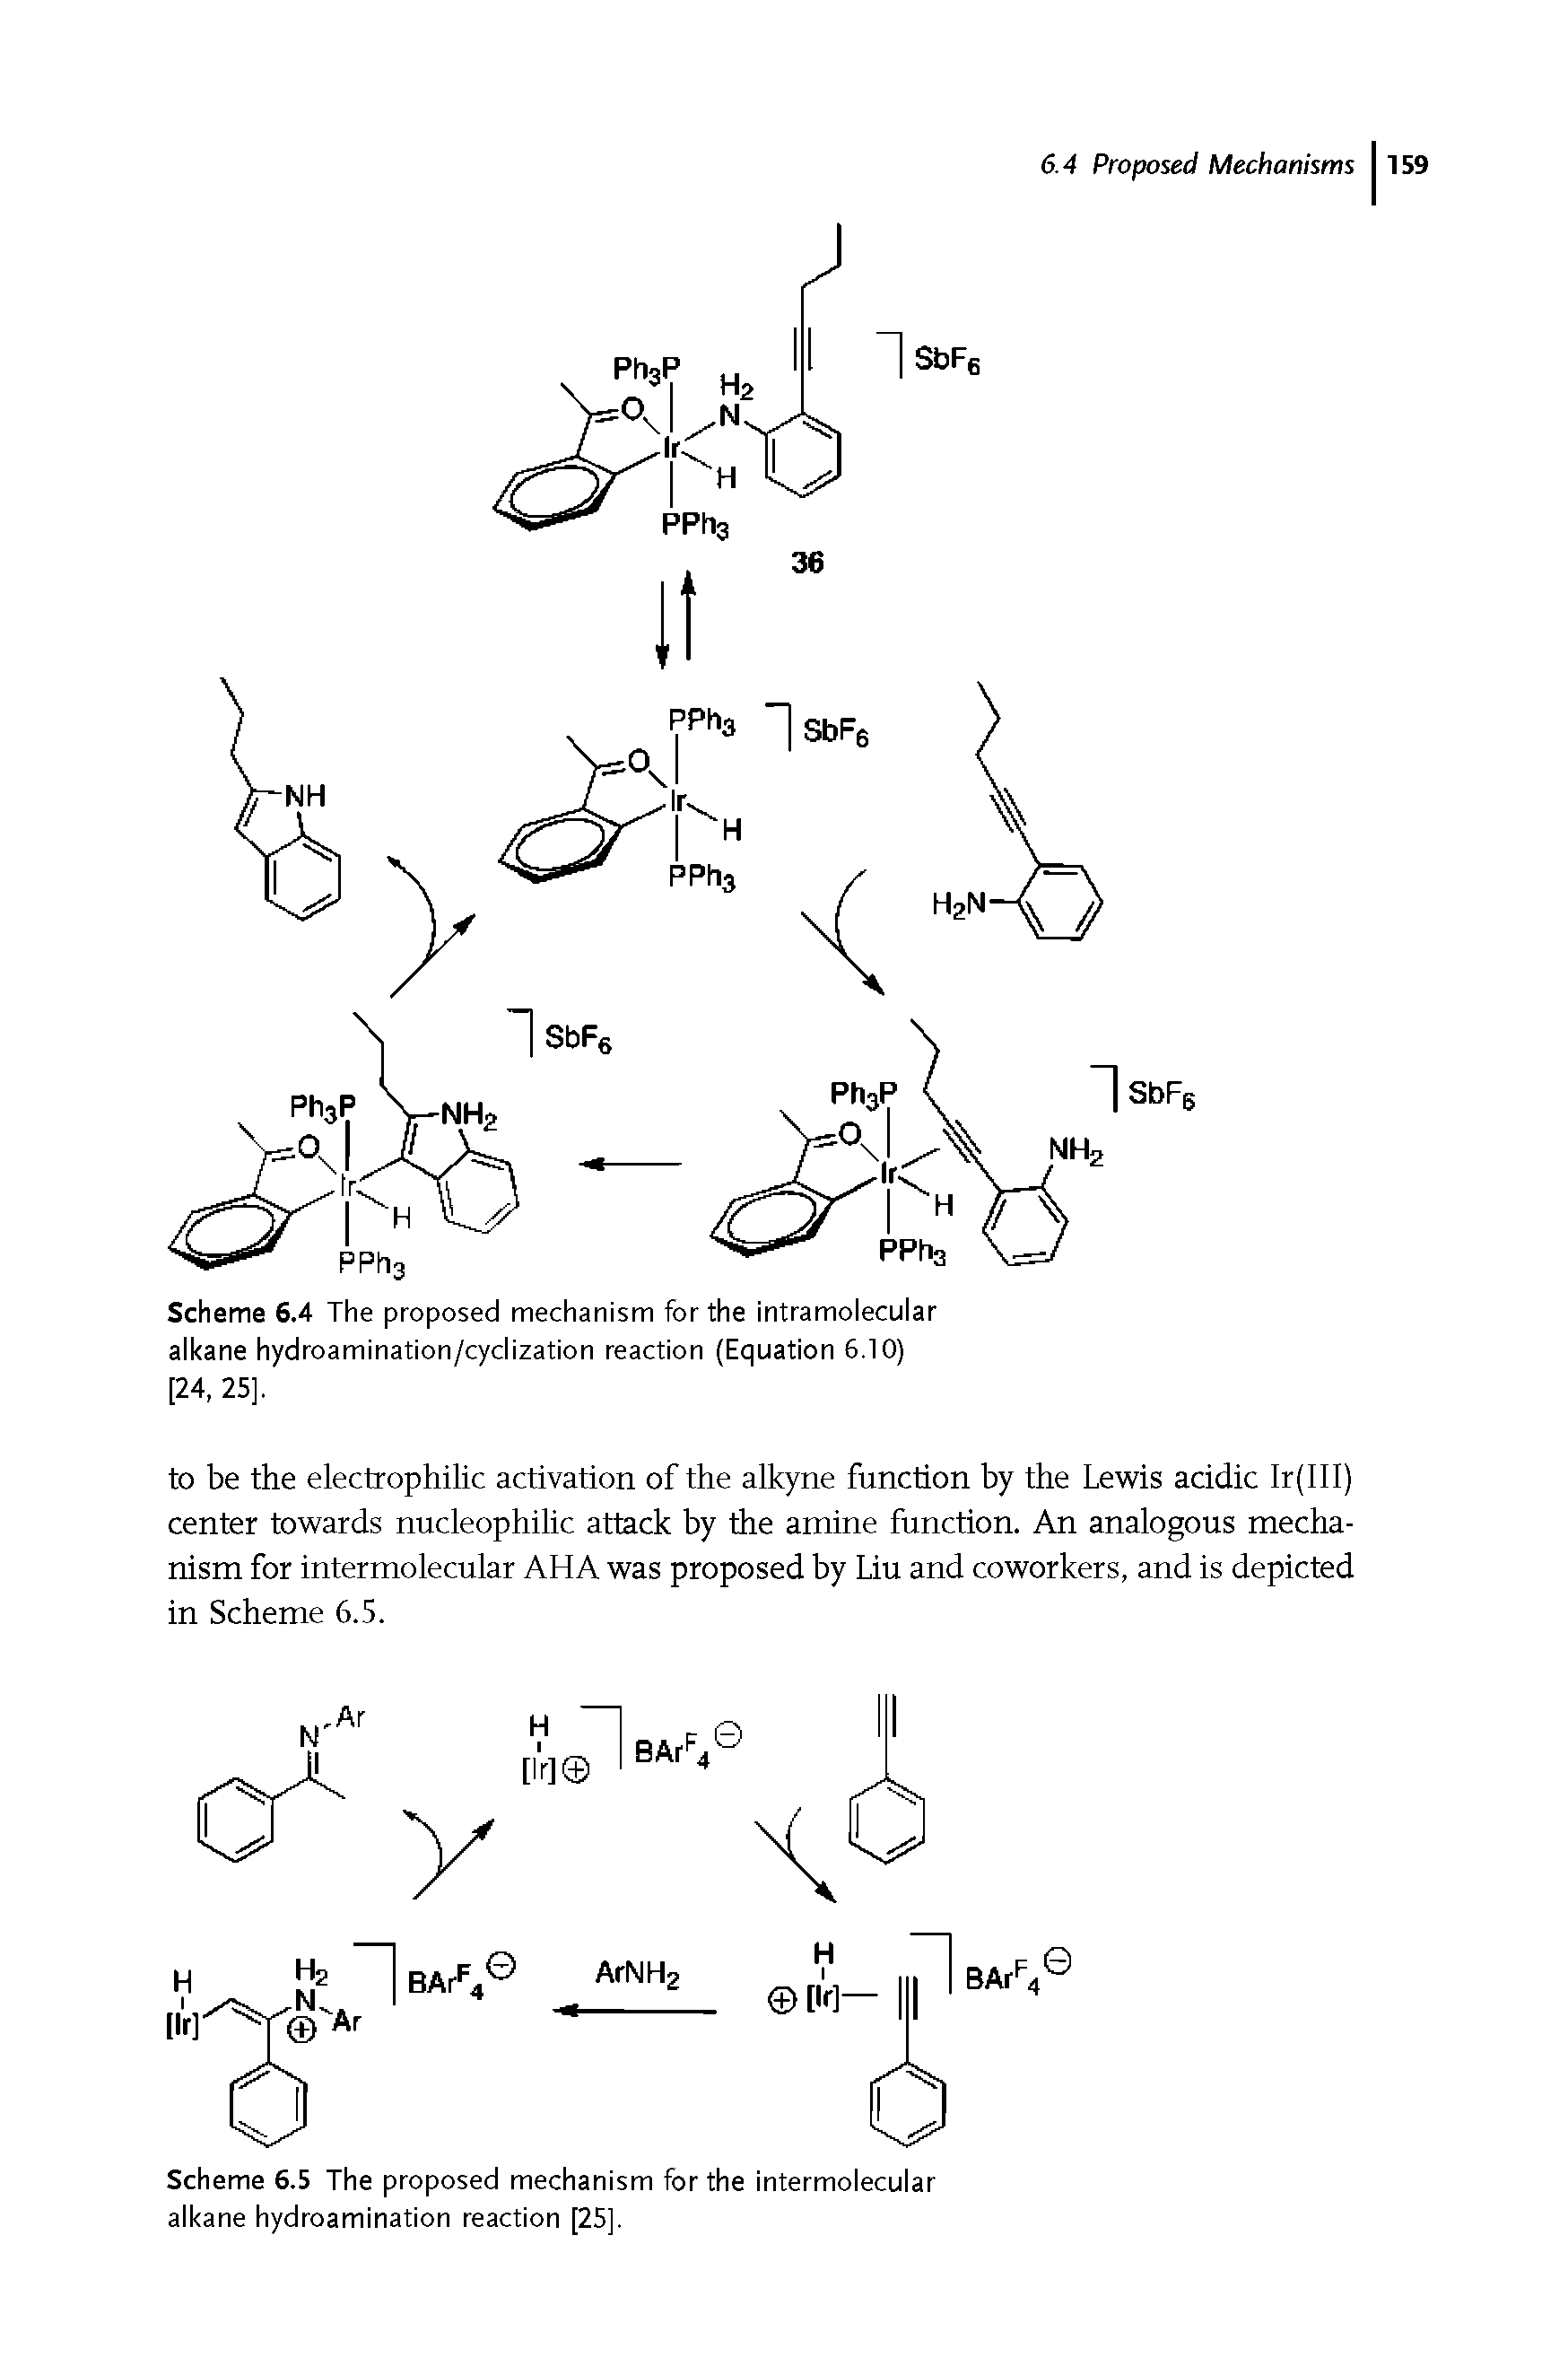 Scheme 6.4 The proposed mechanism for the intramolecular alkane hydroamination/cyclization reaction (Equation 6.10)...